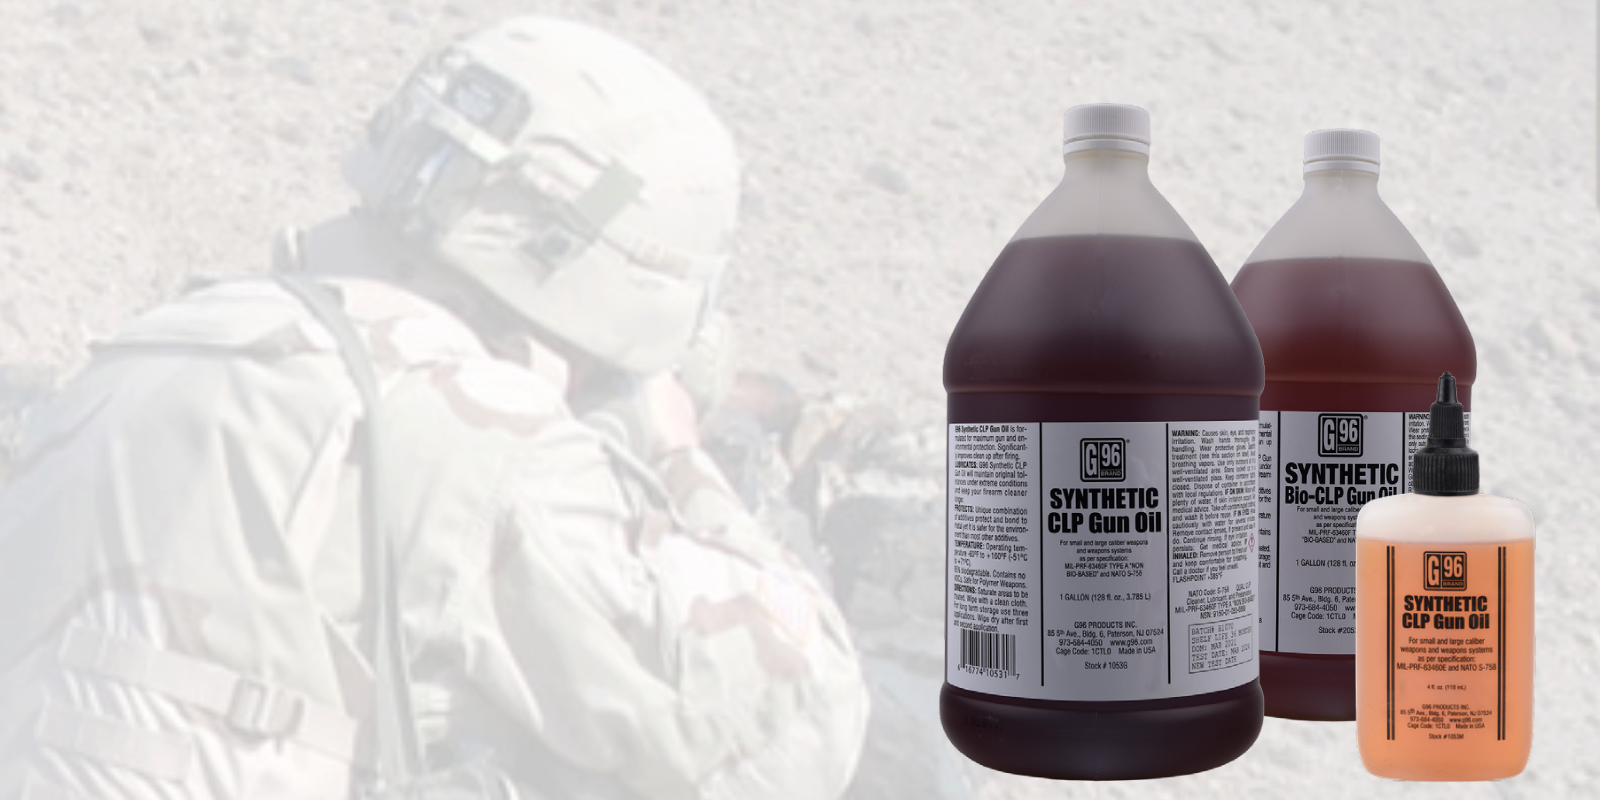 G96 Products Inc. – Gun Lubricants & Cleaning Products for Firearms